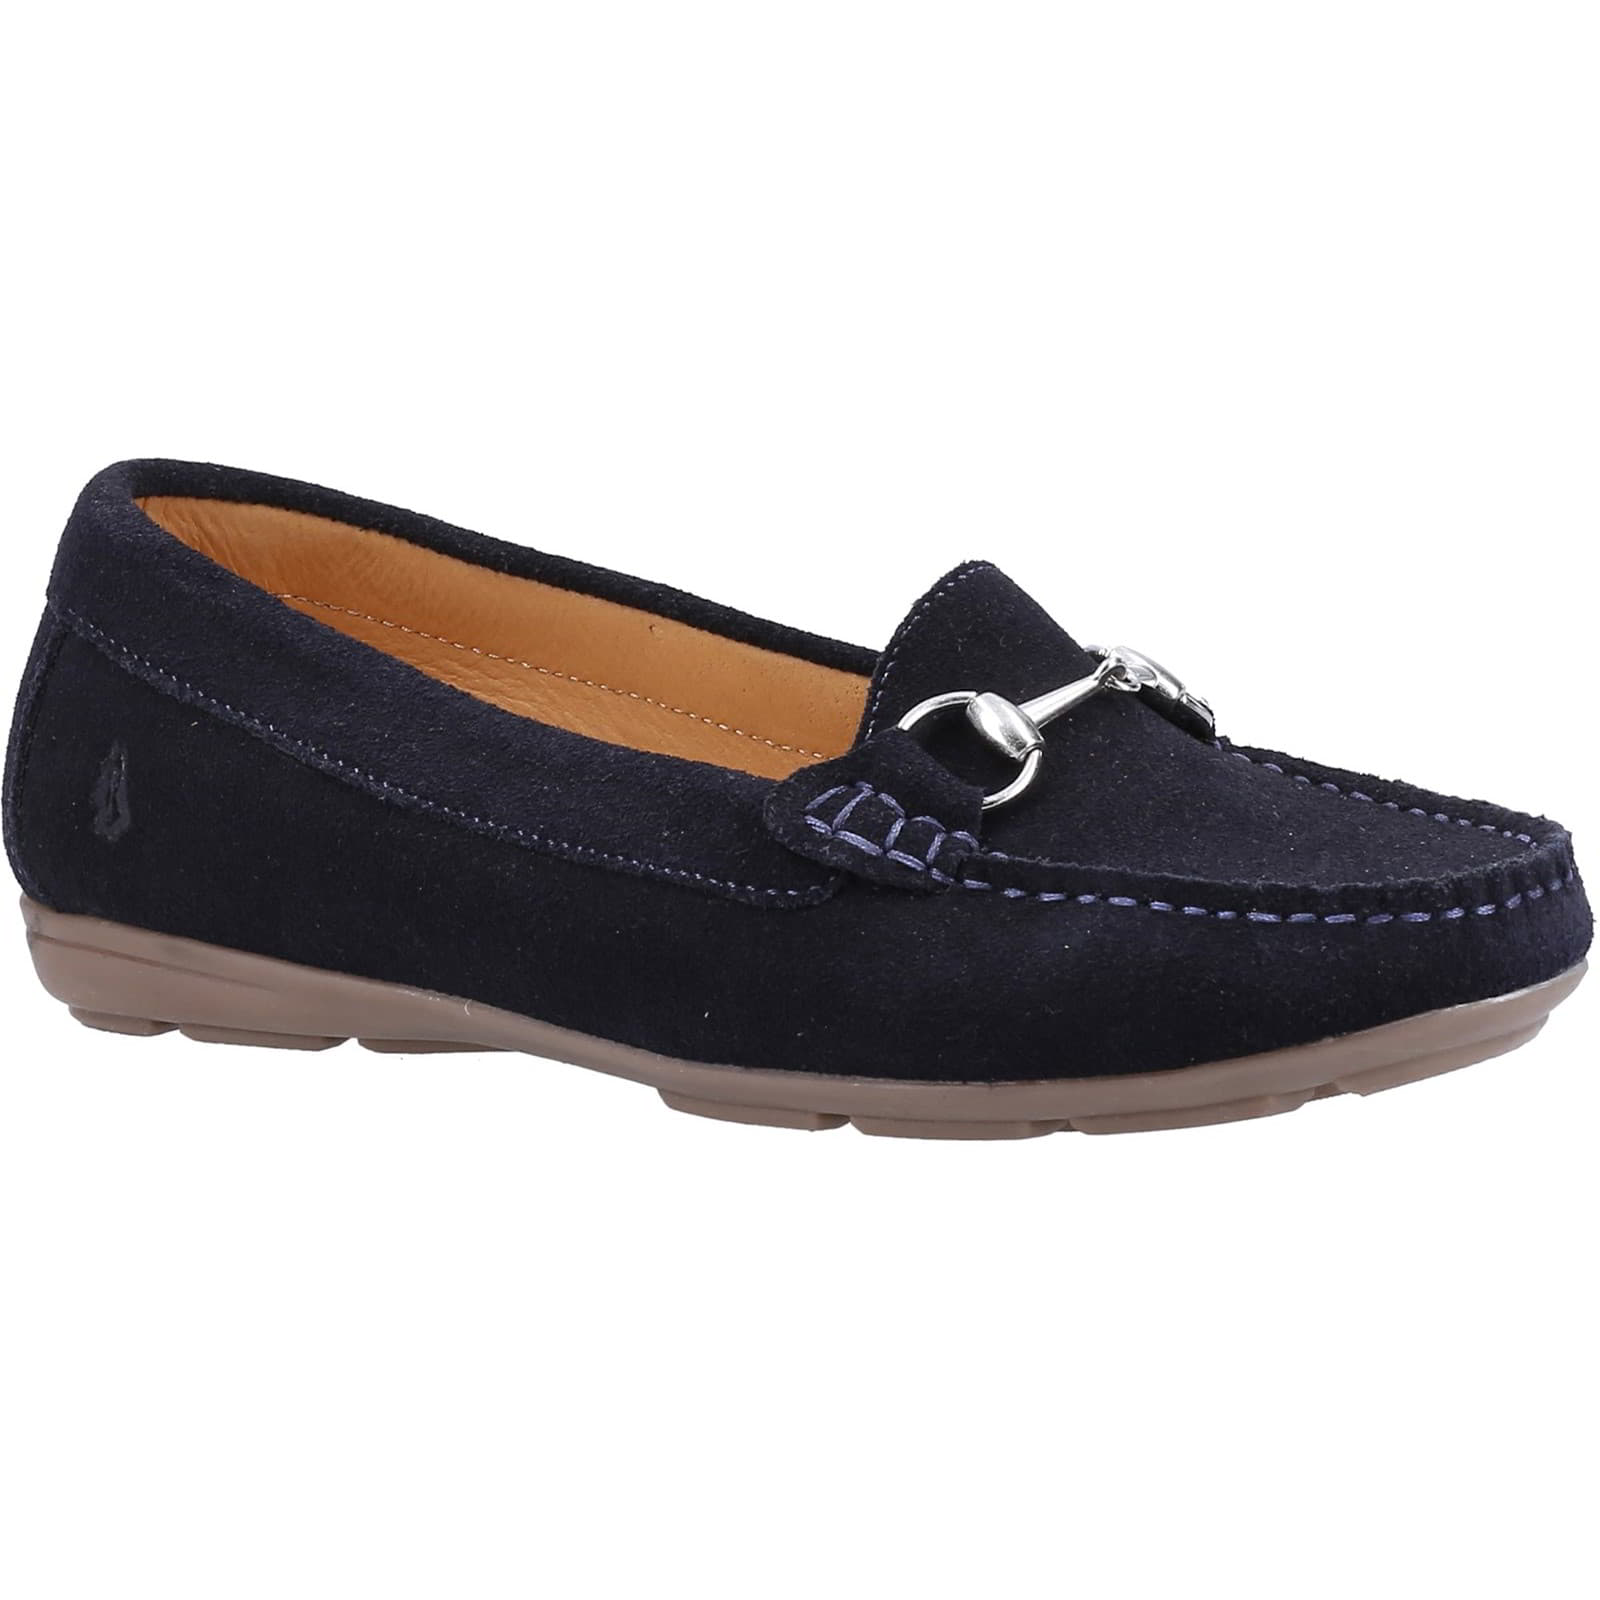 Hush Puppies Women's Molly Leather Slip On Loafers Shoes - UK 6